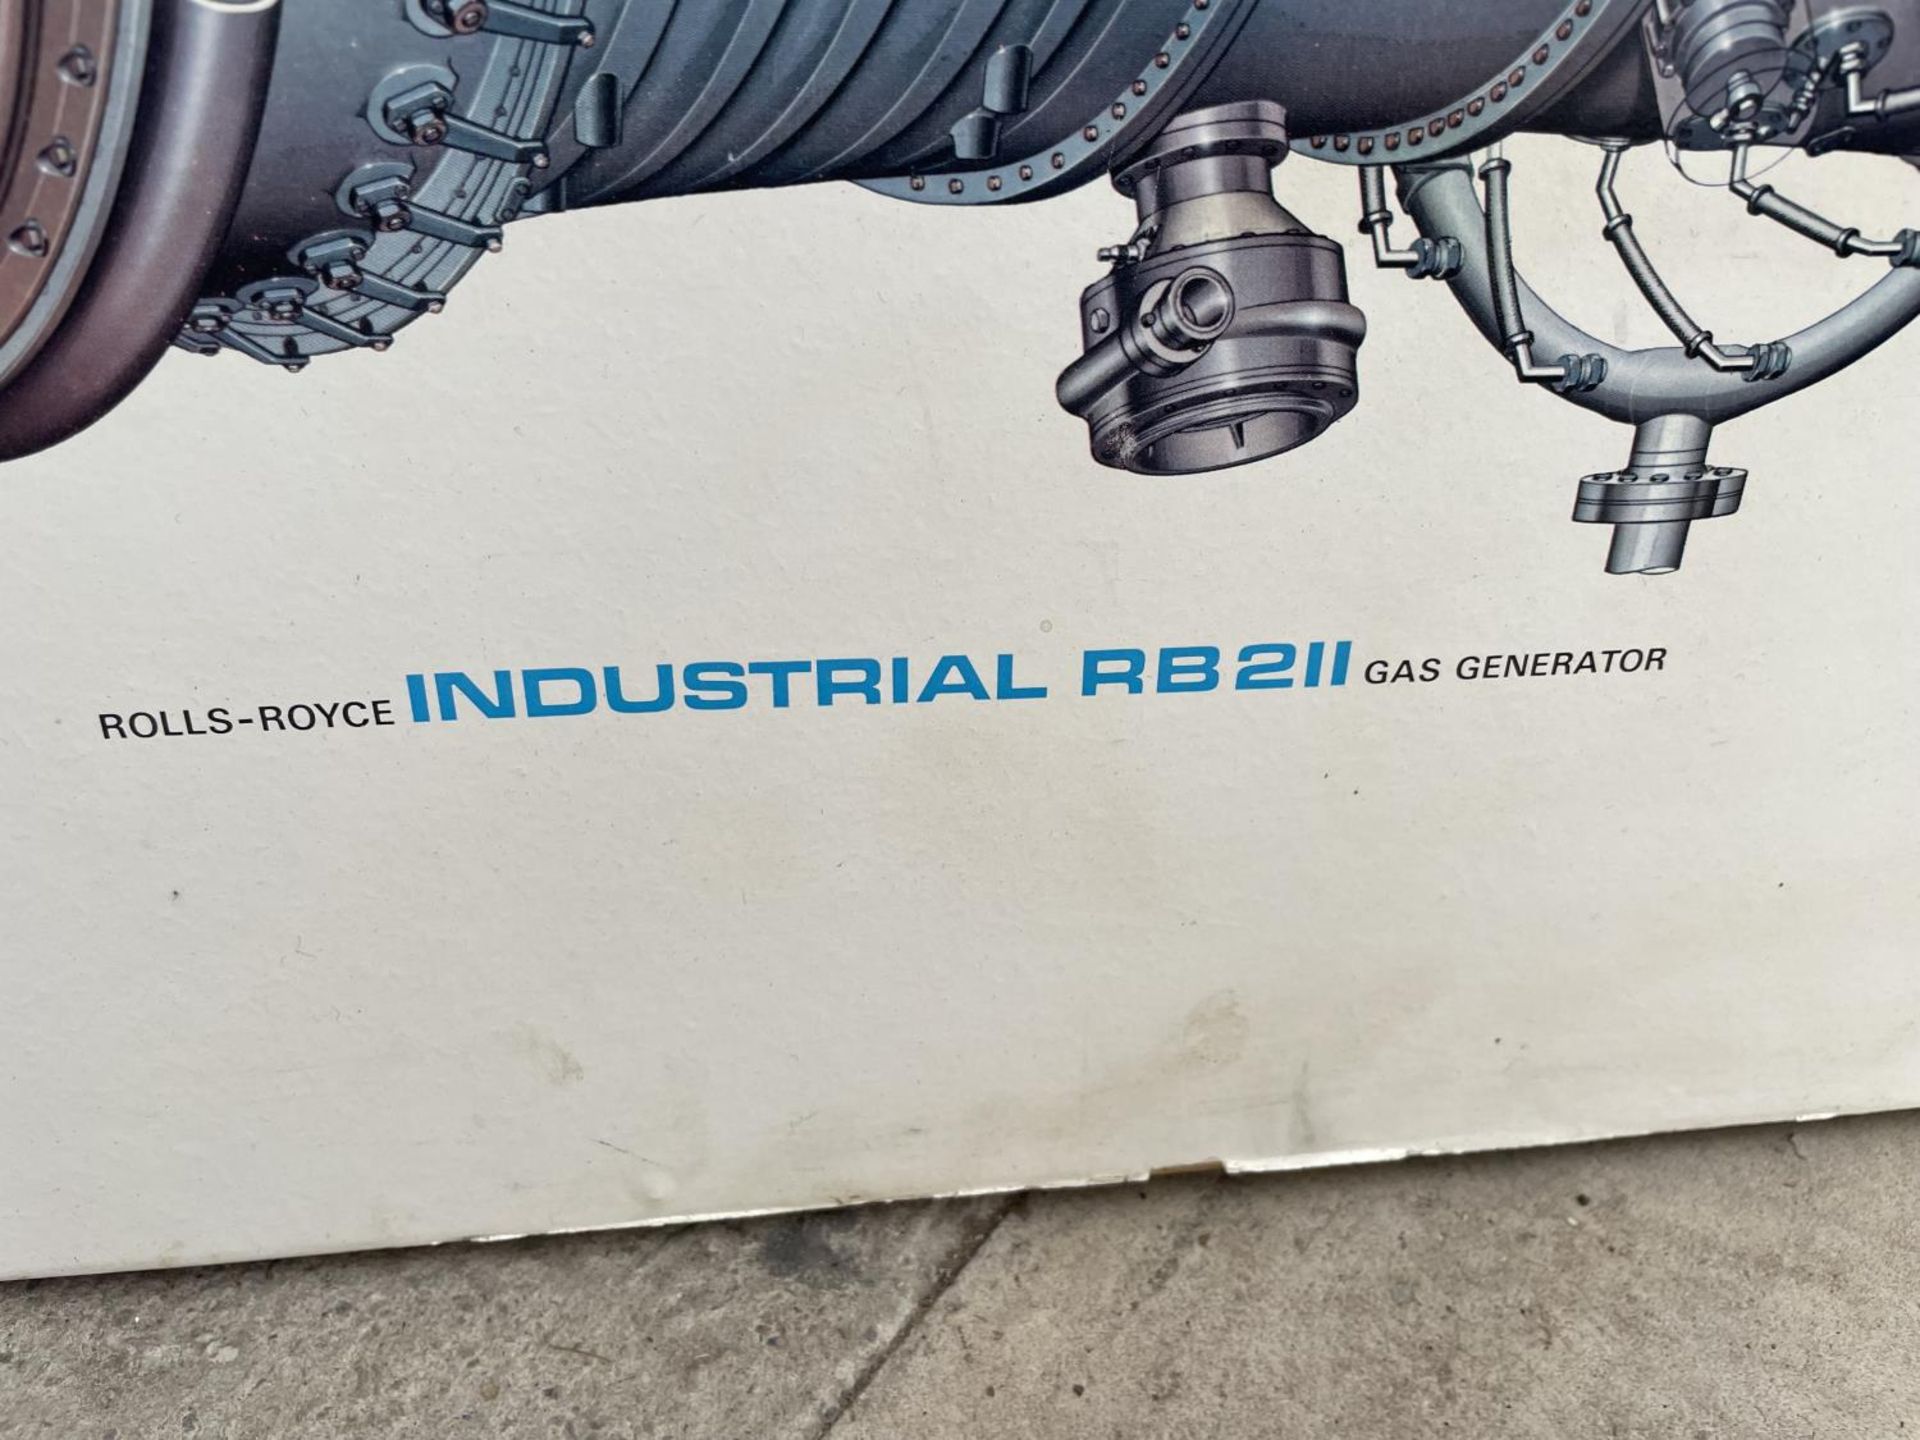 A PRINT OF A ROLLS ROYCE INDUSTRIAL RB211 GAS GENERATOR - Image 2 of 3